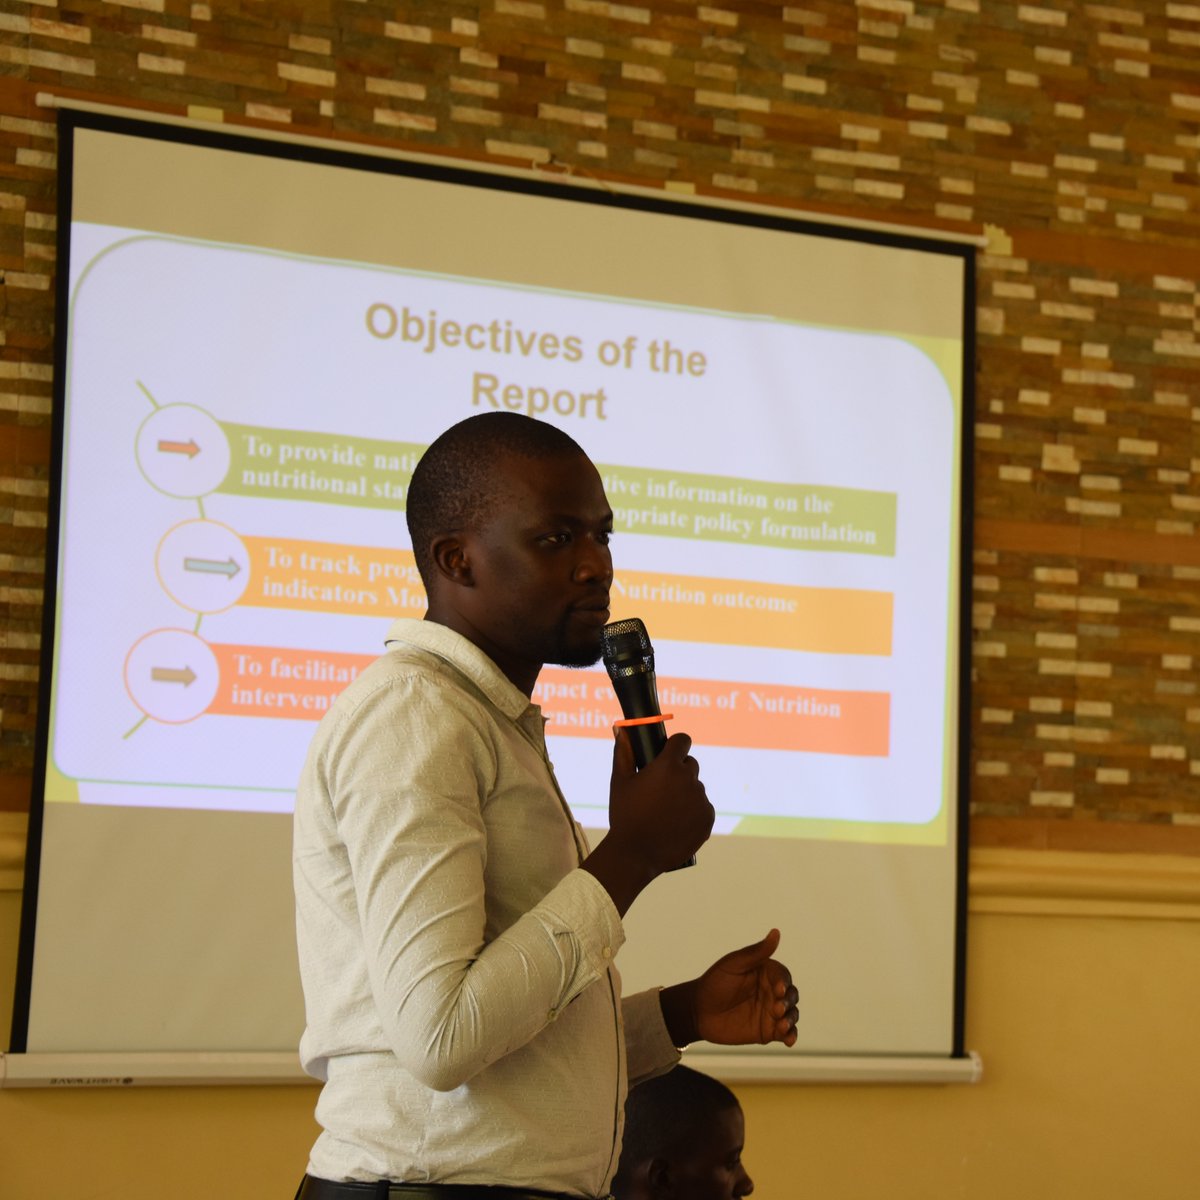 Moses Mbuusi, a statistician from the @StatisticsUg wrapped up Day One with a presentation on the Uganda Nutrition Action Plan (UNAP) and commonly used terms in Nutrition @NipnOpm #NutritionSituationUG @OPMUganda @ultimate_UMC @gbusinge @philebadagawa @tumwineedward @pascaldom94